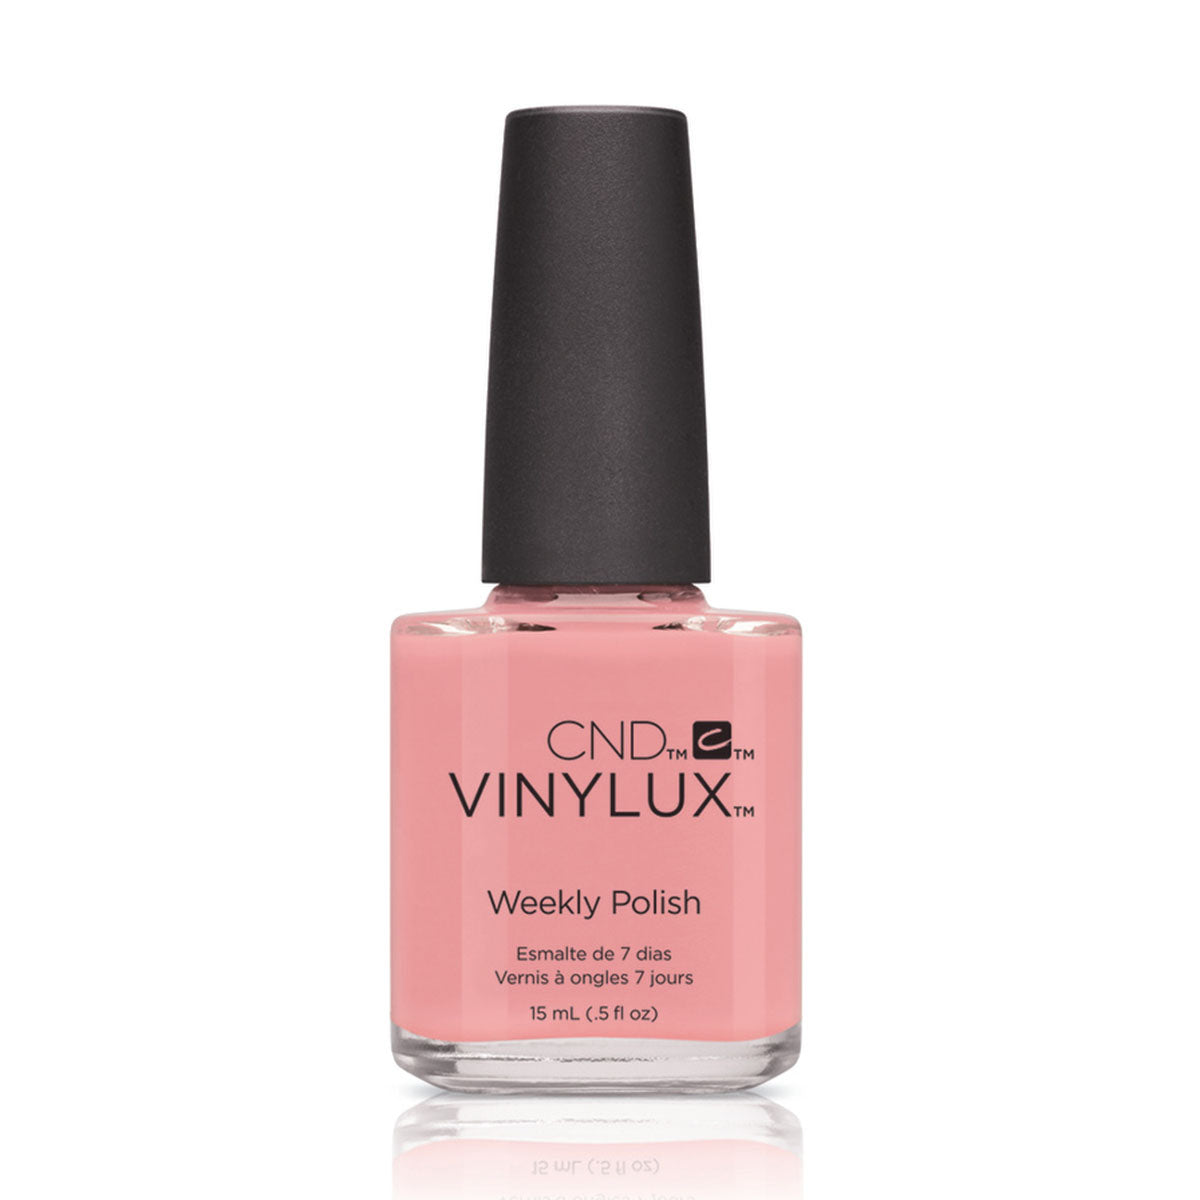 CND Vinylux Nude Knickers